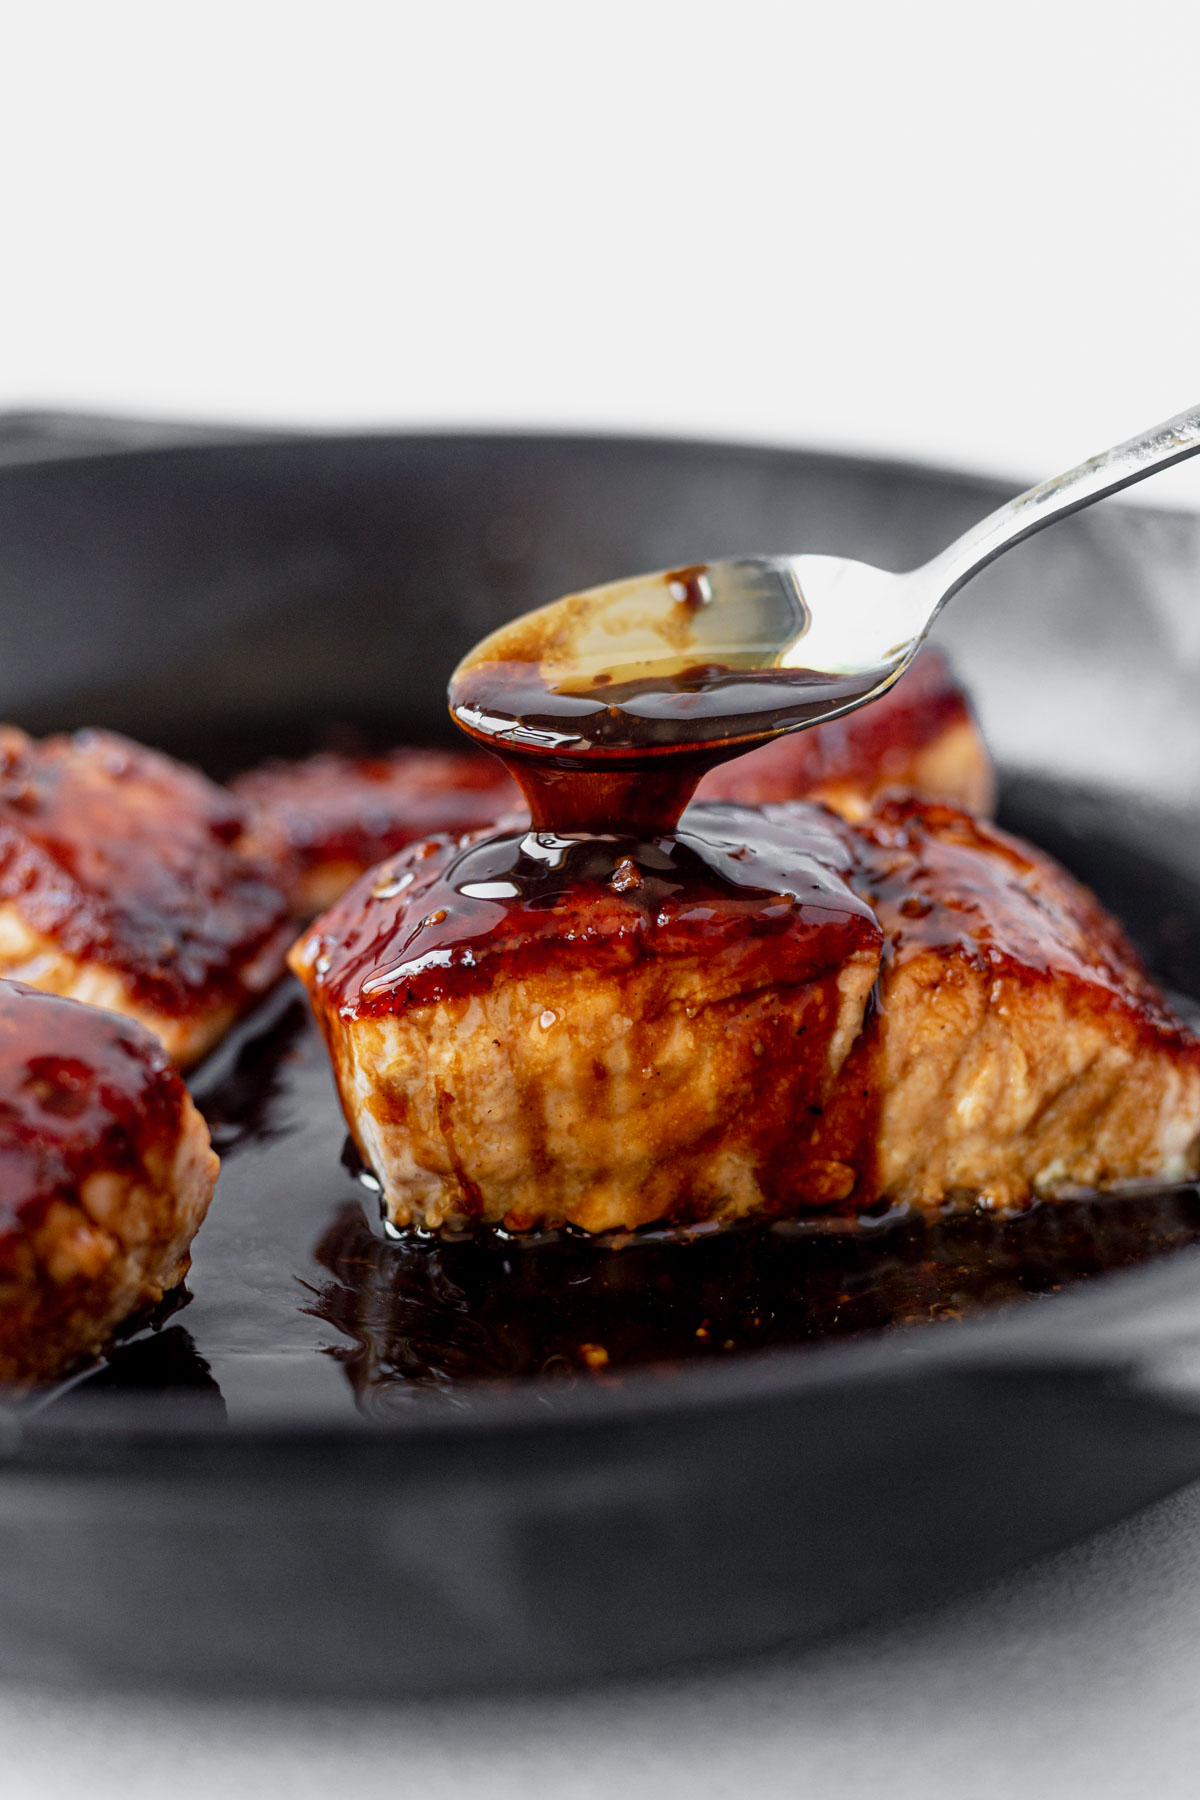 spooning teriyaki glaze over a piece of cooked salmon